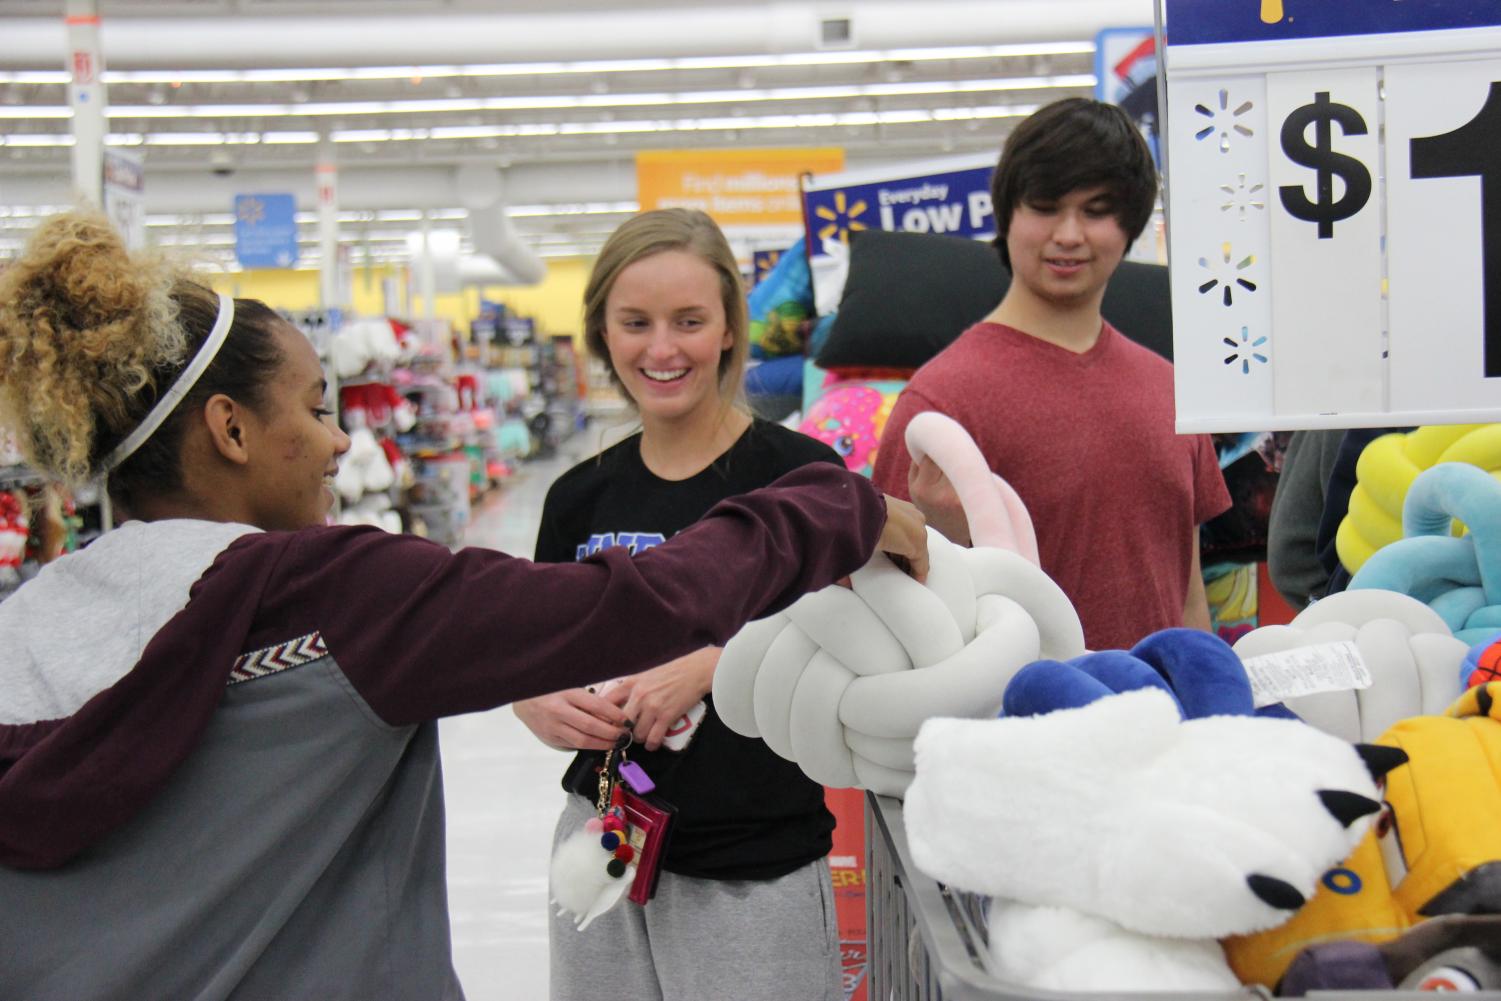 (From left to right) Senior Lauren Sumner, junior Braeleigh Flickenger and senior Logan Maynard shop for the angel gifts. NHS members went to Walmart and Target on November 30th.